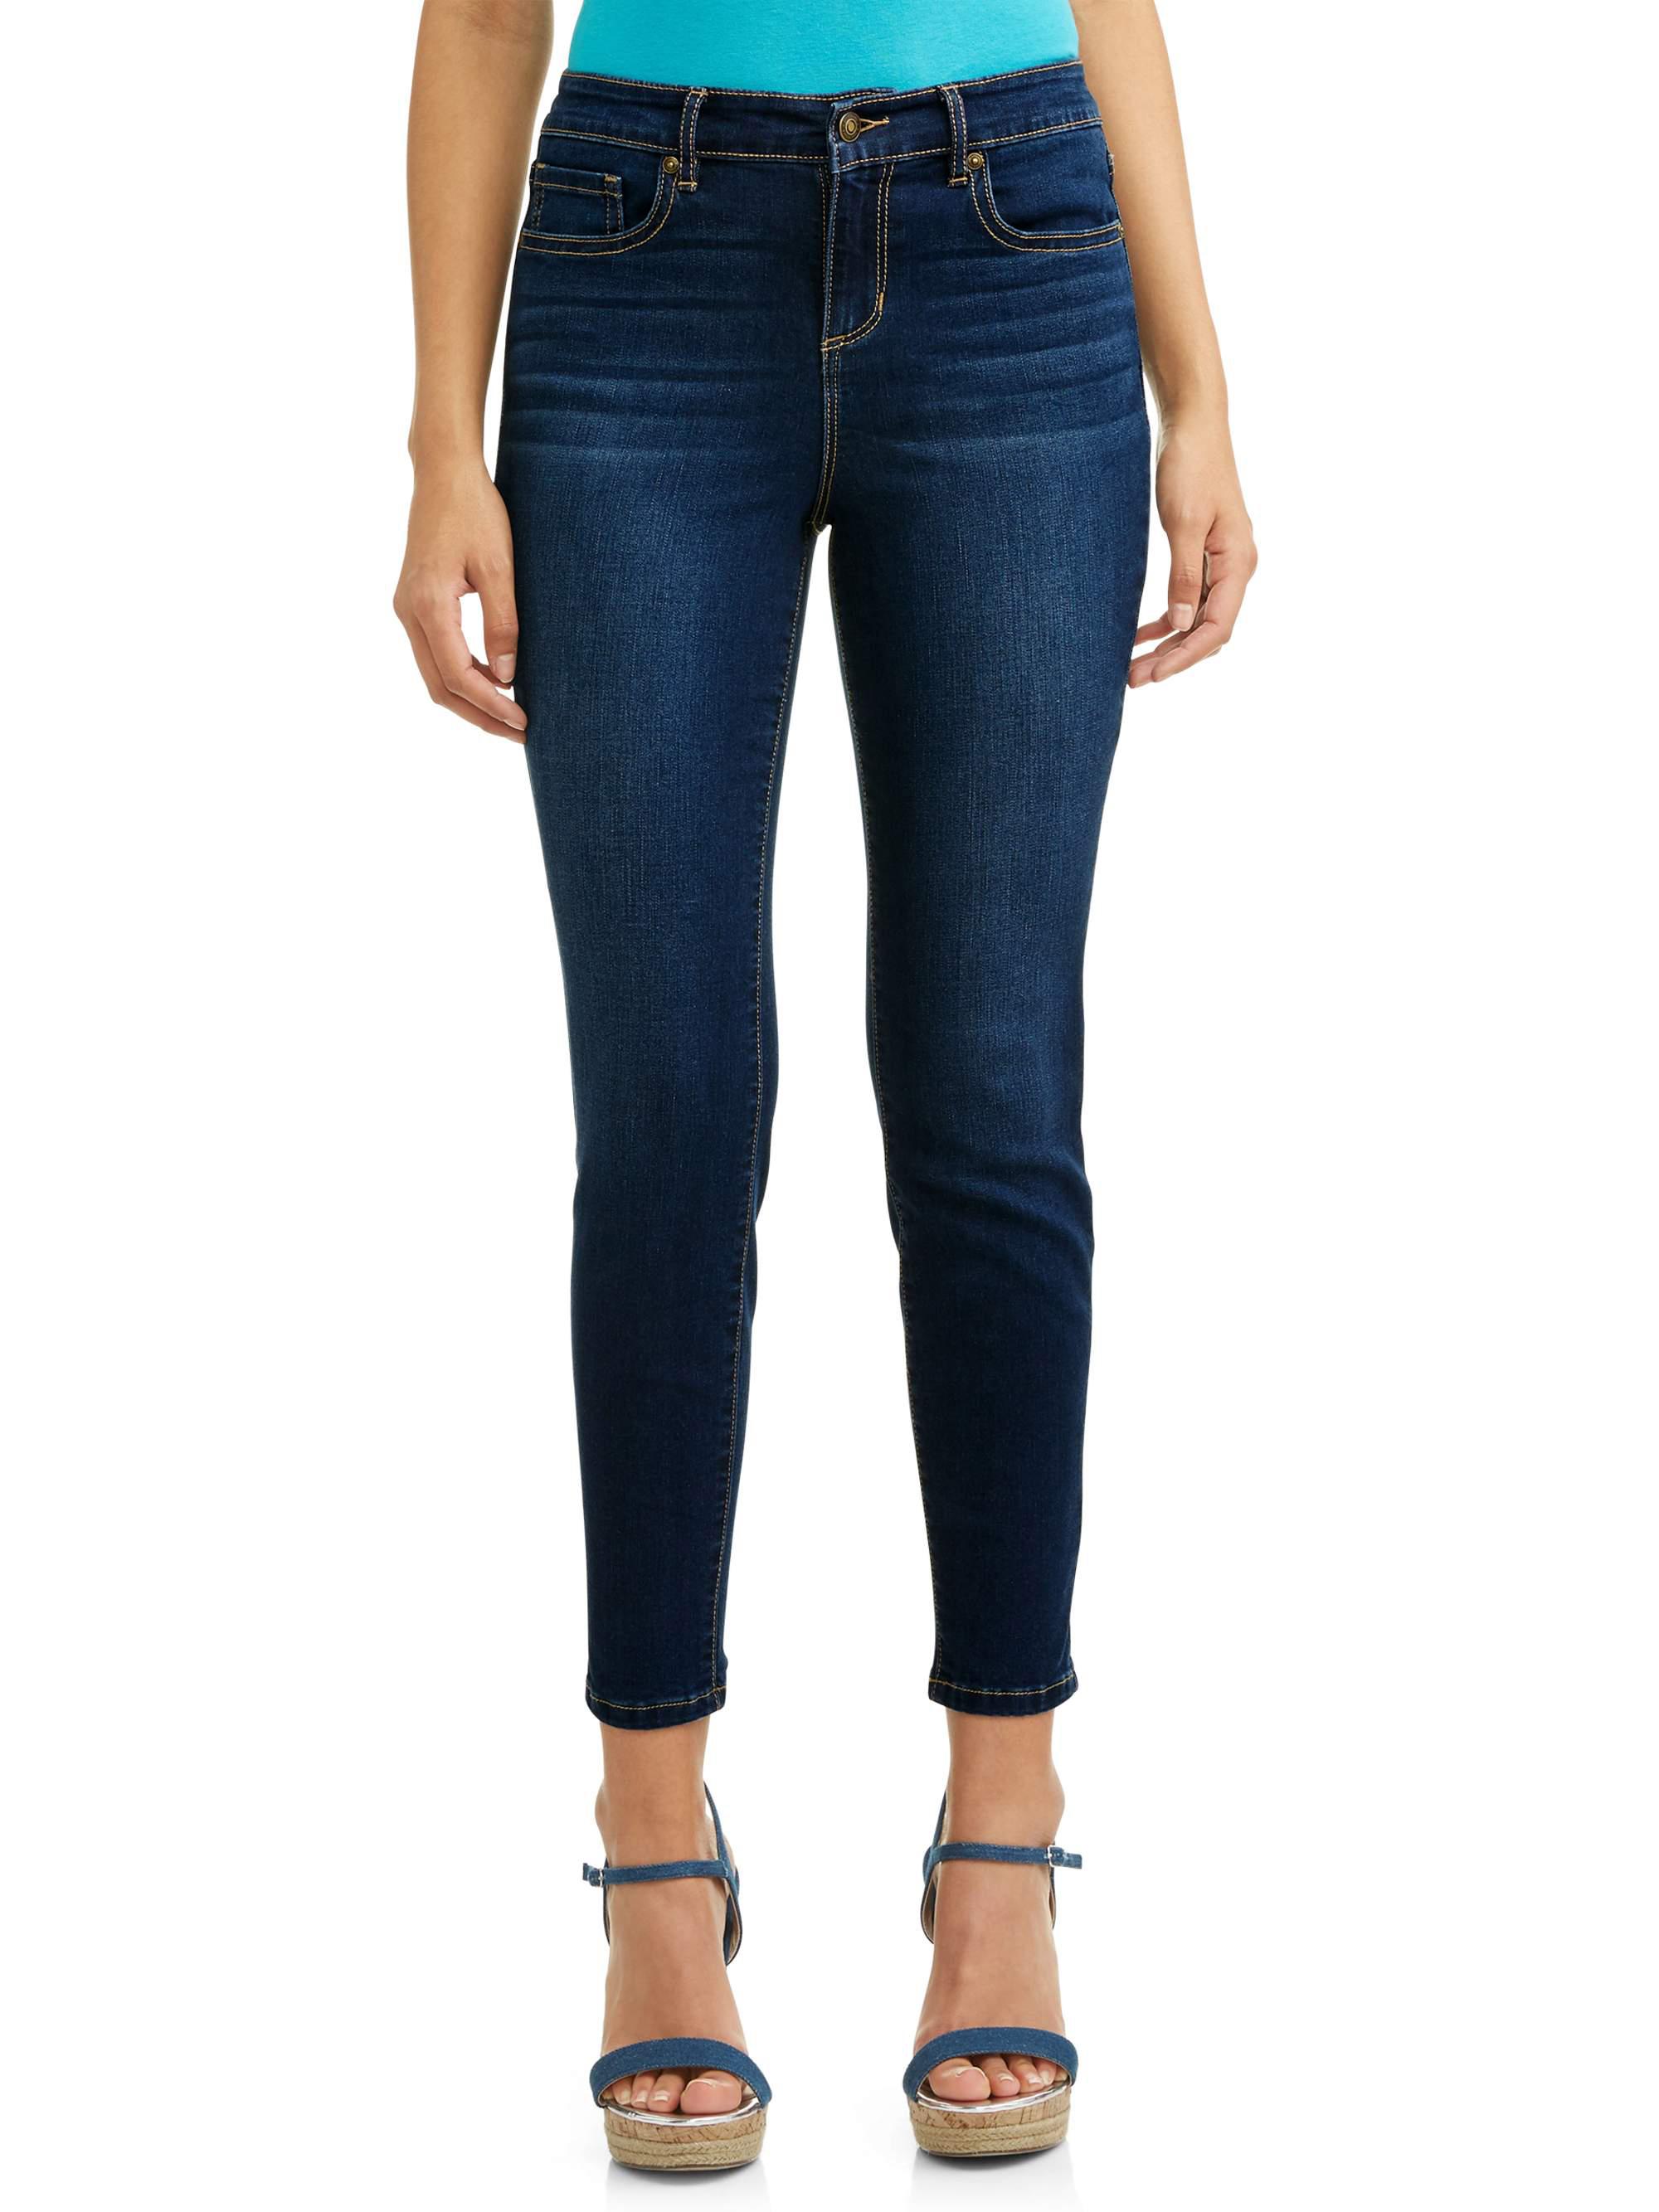 Sofia Jeans by Sofia Vergara Women's Mid-Rise Skinny Ankle Jeans Various  Sizes